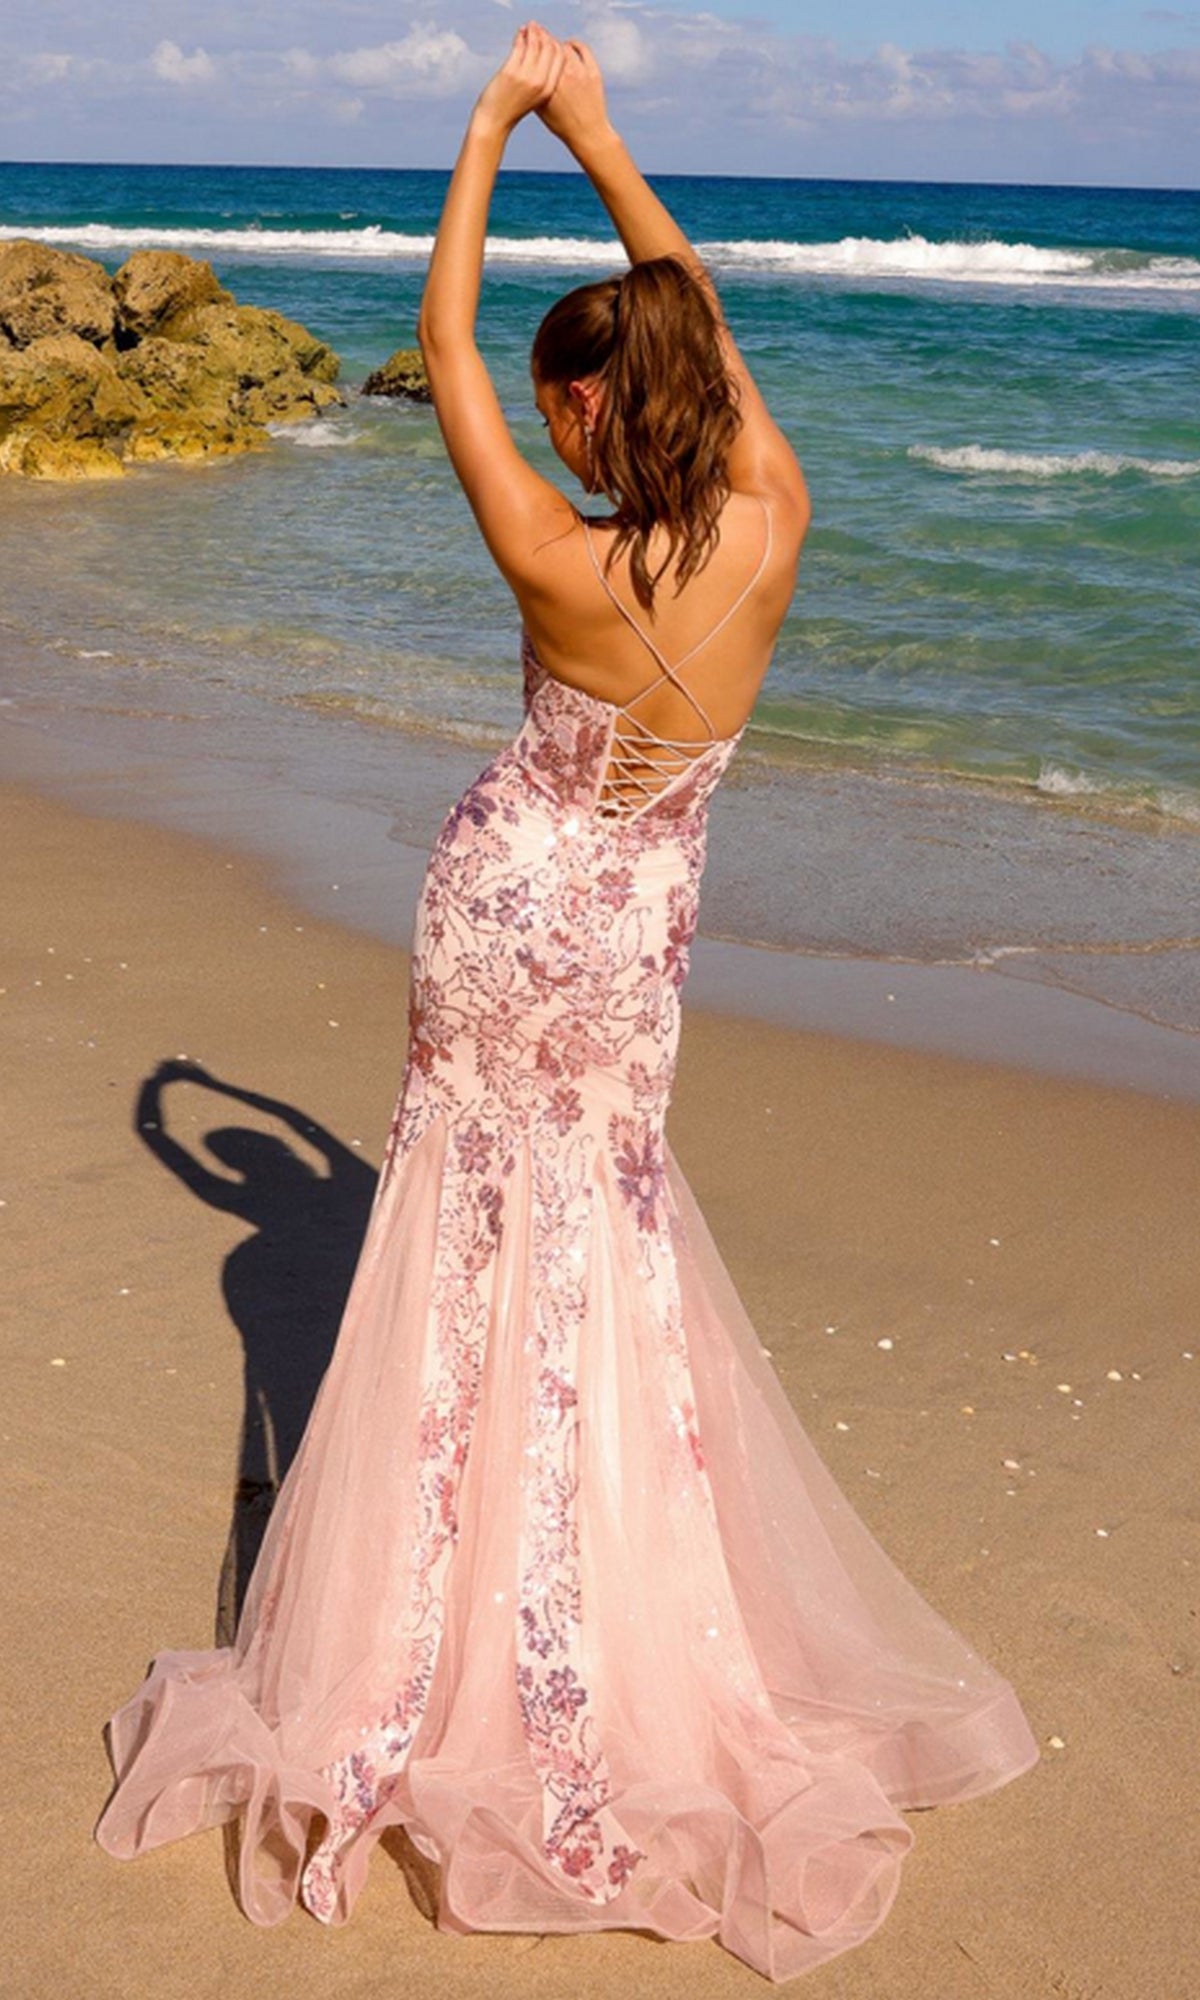 Floral-Sequin Long Mermaid Prom Dress 7038